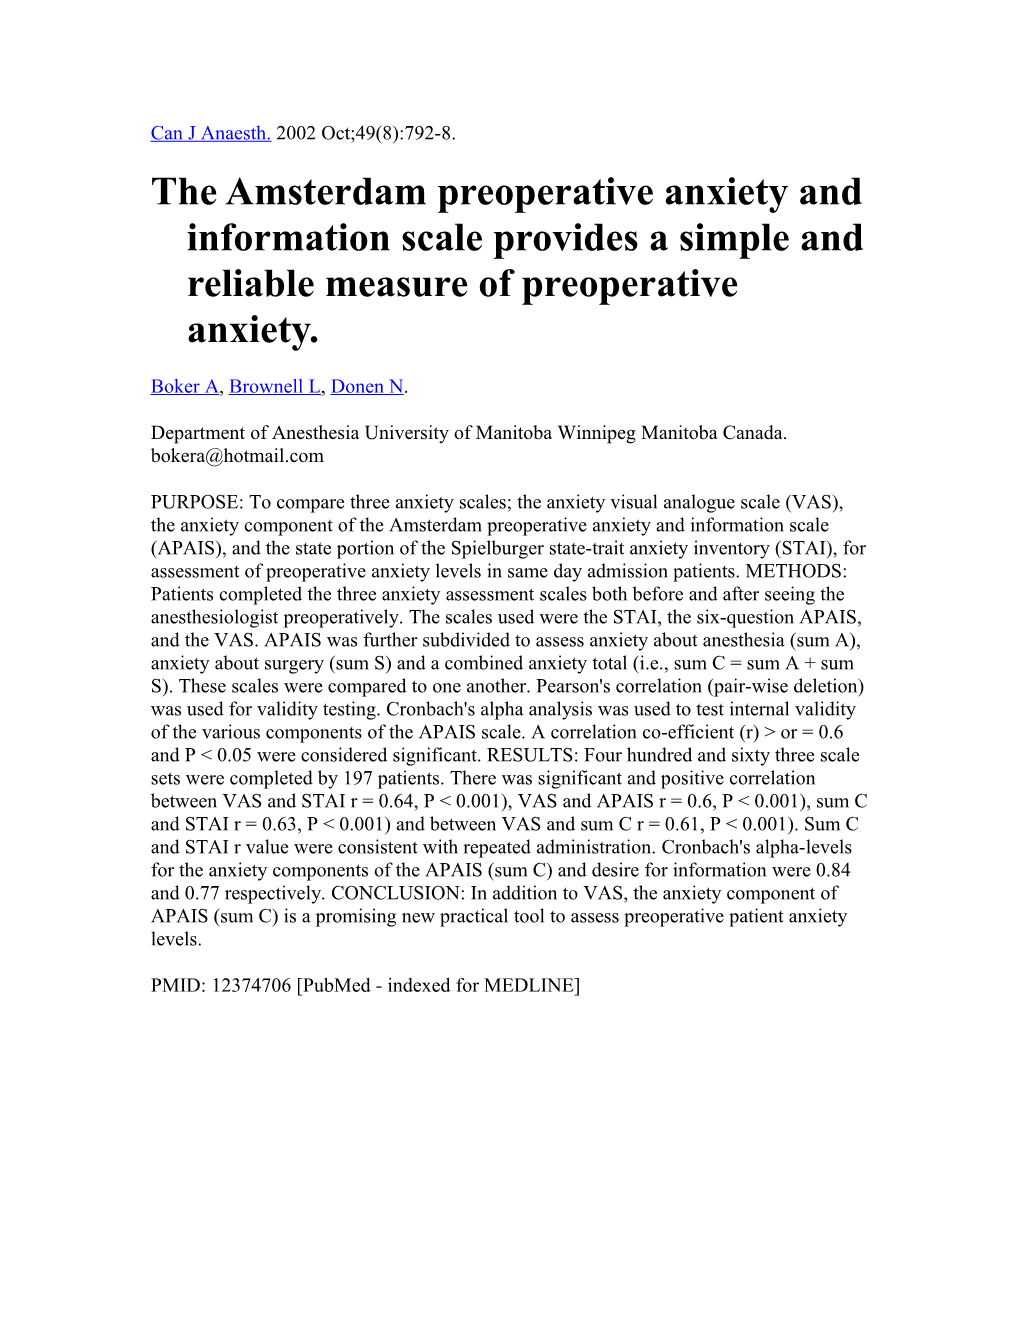 The Amsterdam Preoperative Anxiety and Information Scale Provides a Simple and Reliable